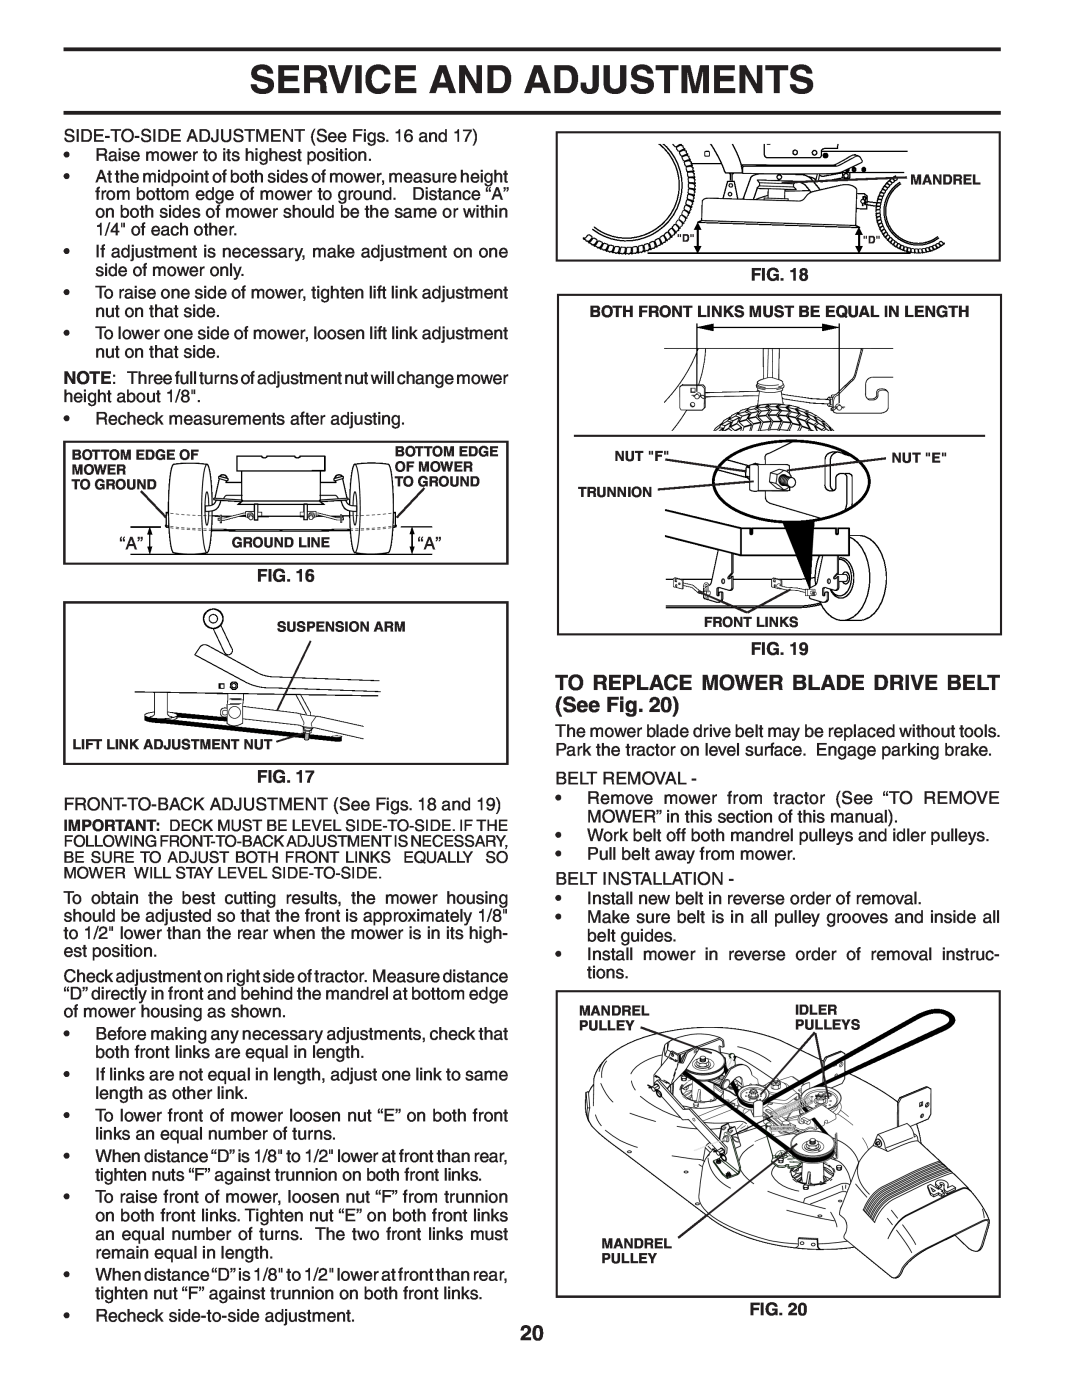 Poulan BB185H42LT manual TO REPLACE MOWER BLADE DRIVE BELT See Fig, Service And Adjustments 